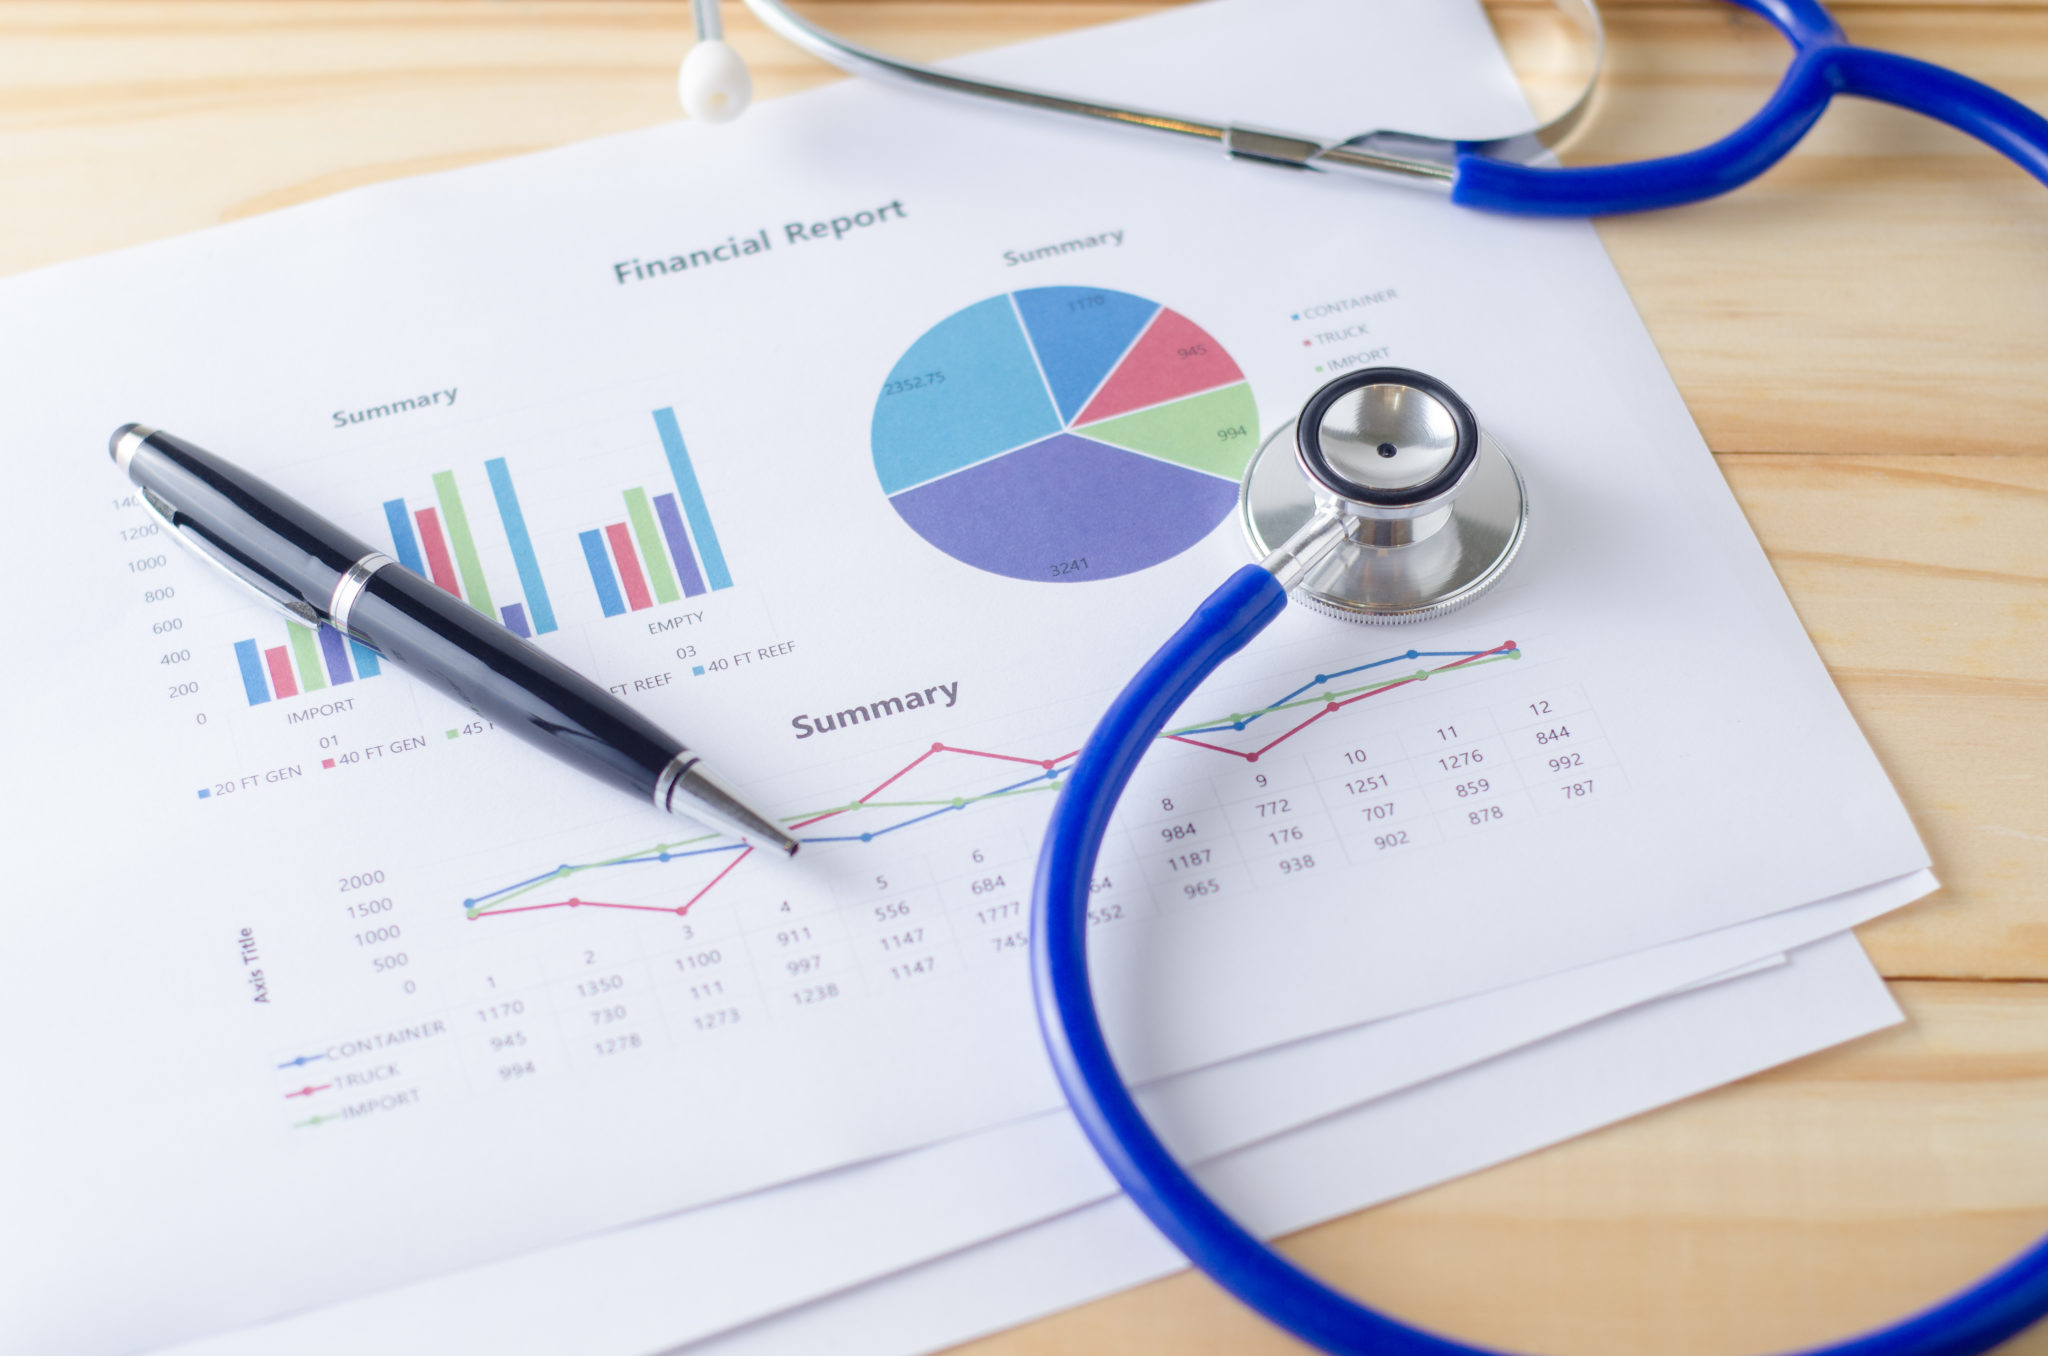 Quality Payment Program (MACRA) – What’s New in 2020?